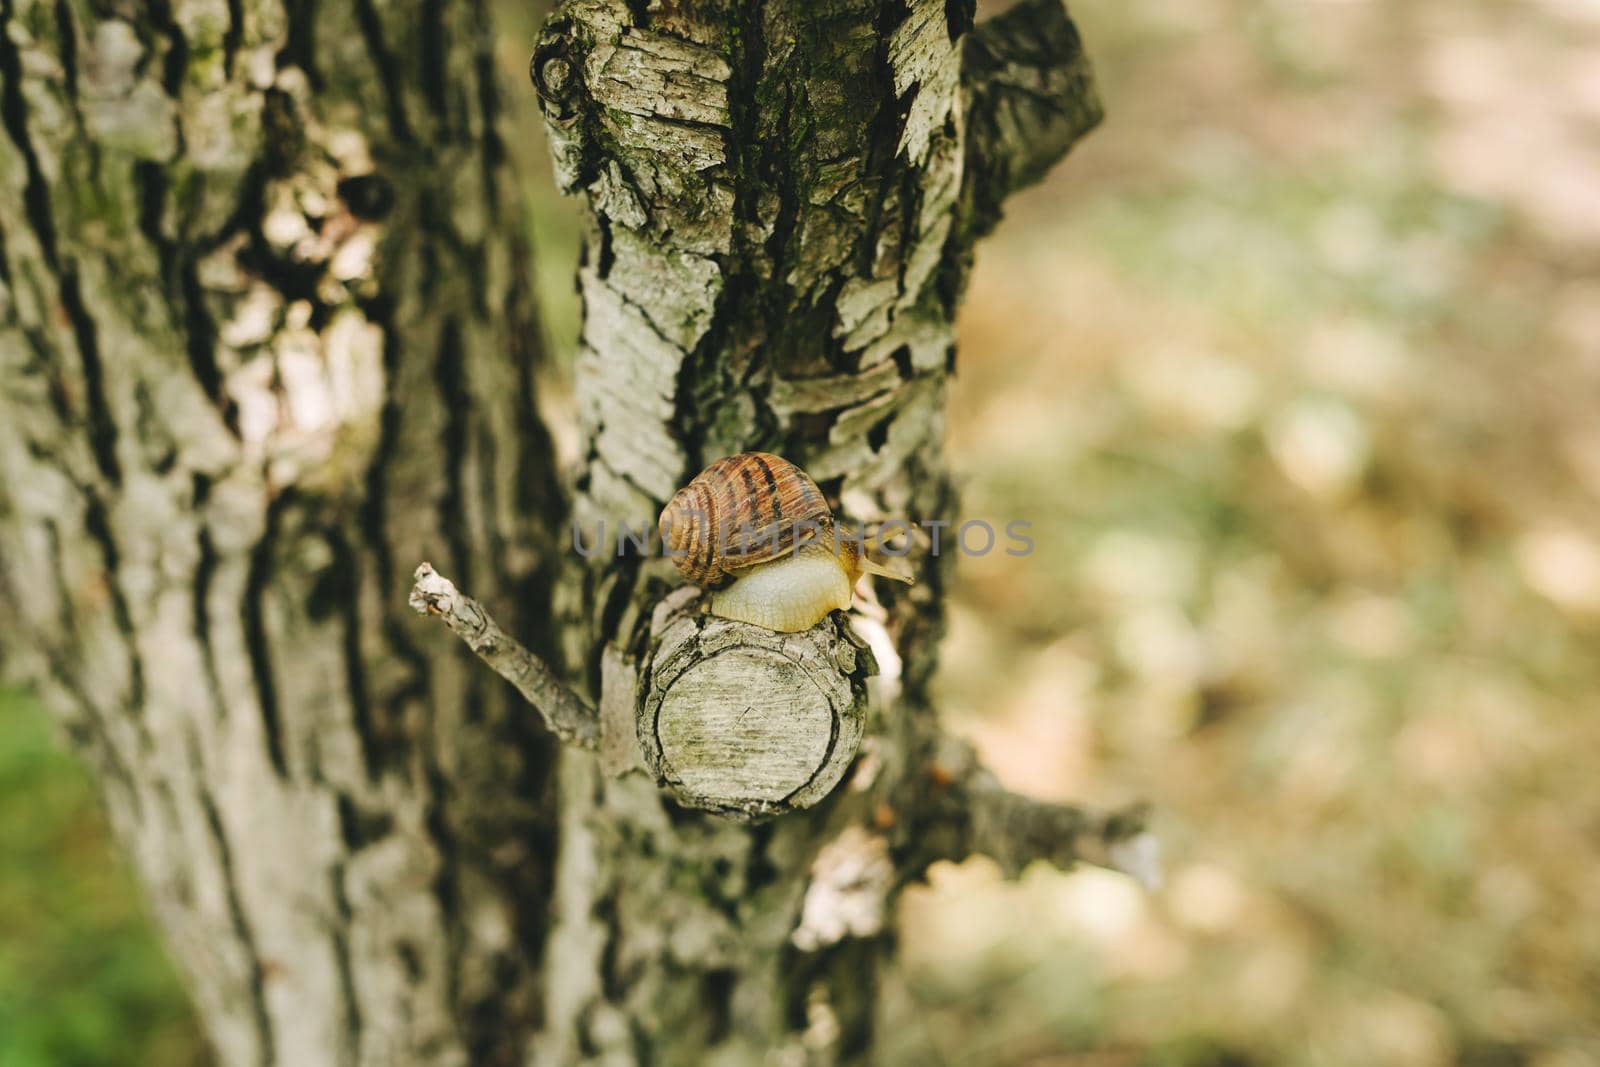 The bark of a tree and a snail on a sawn-off branch. The snail is sitting on a tree. Snail after rain.